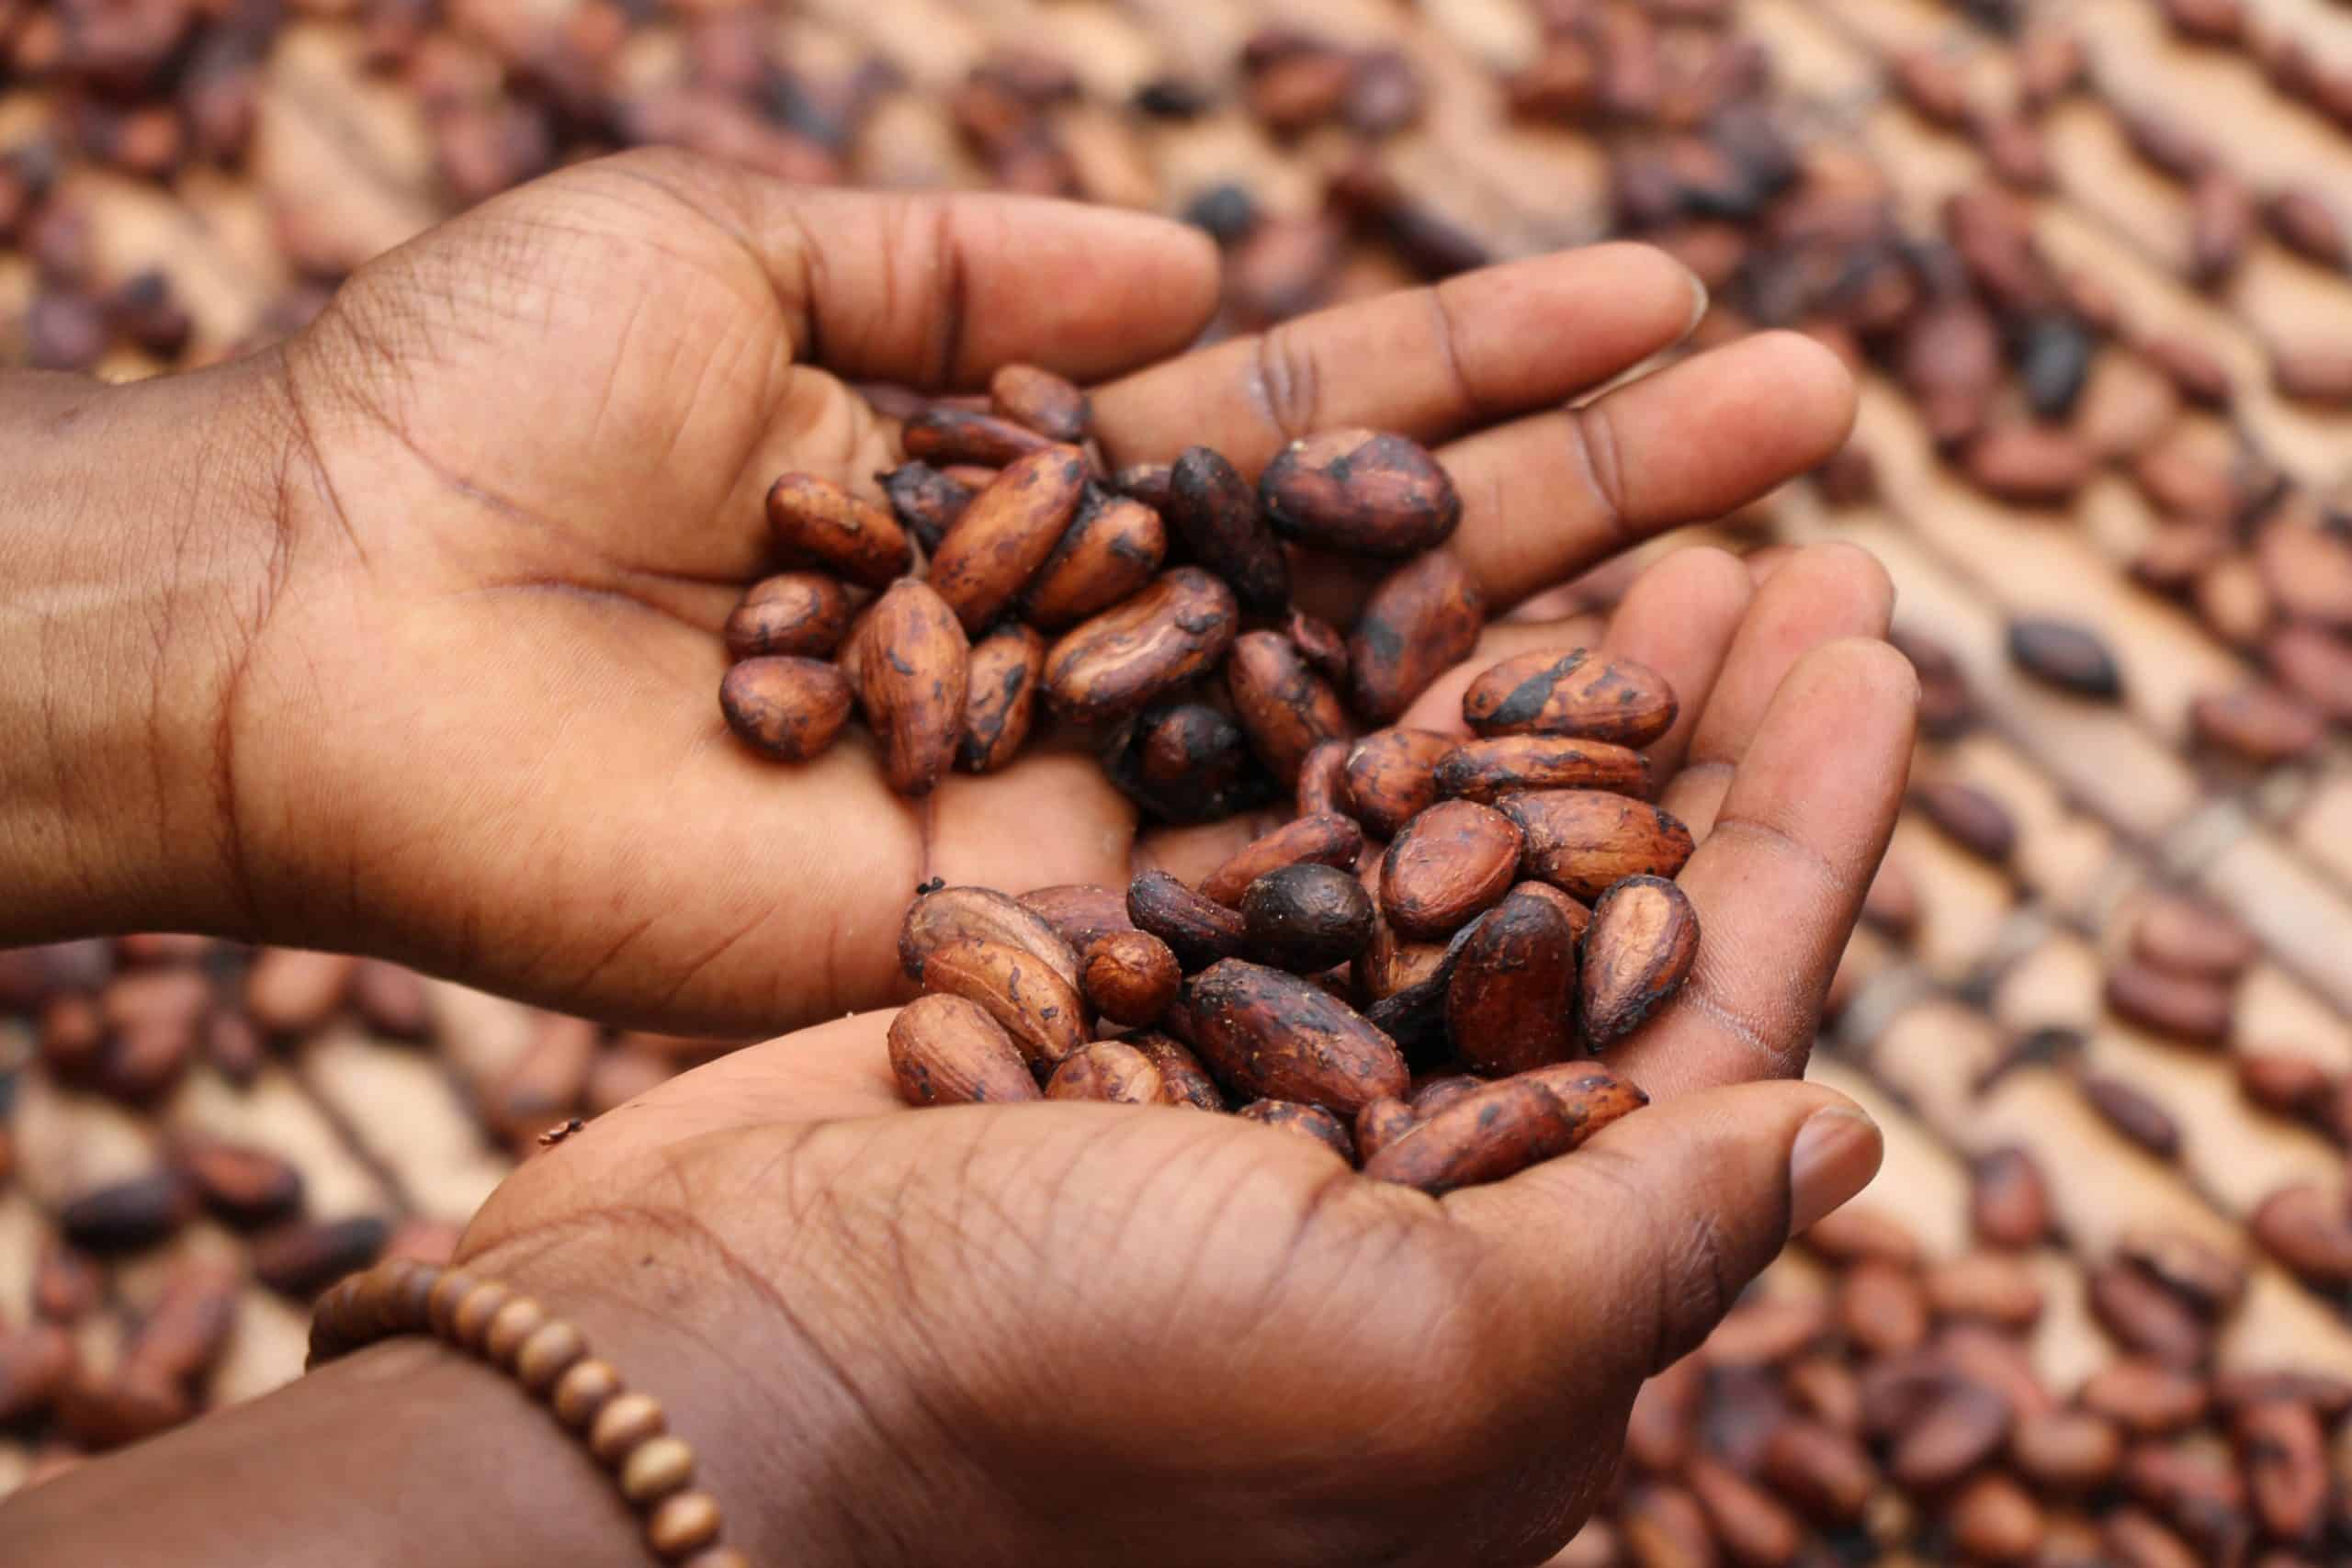 A person holds raw cacao beans in the palms of their hands.